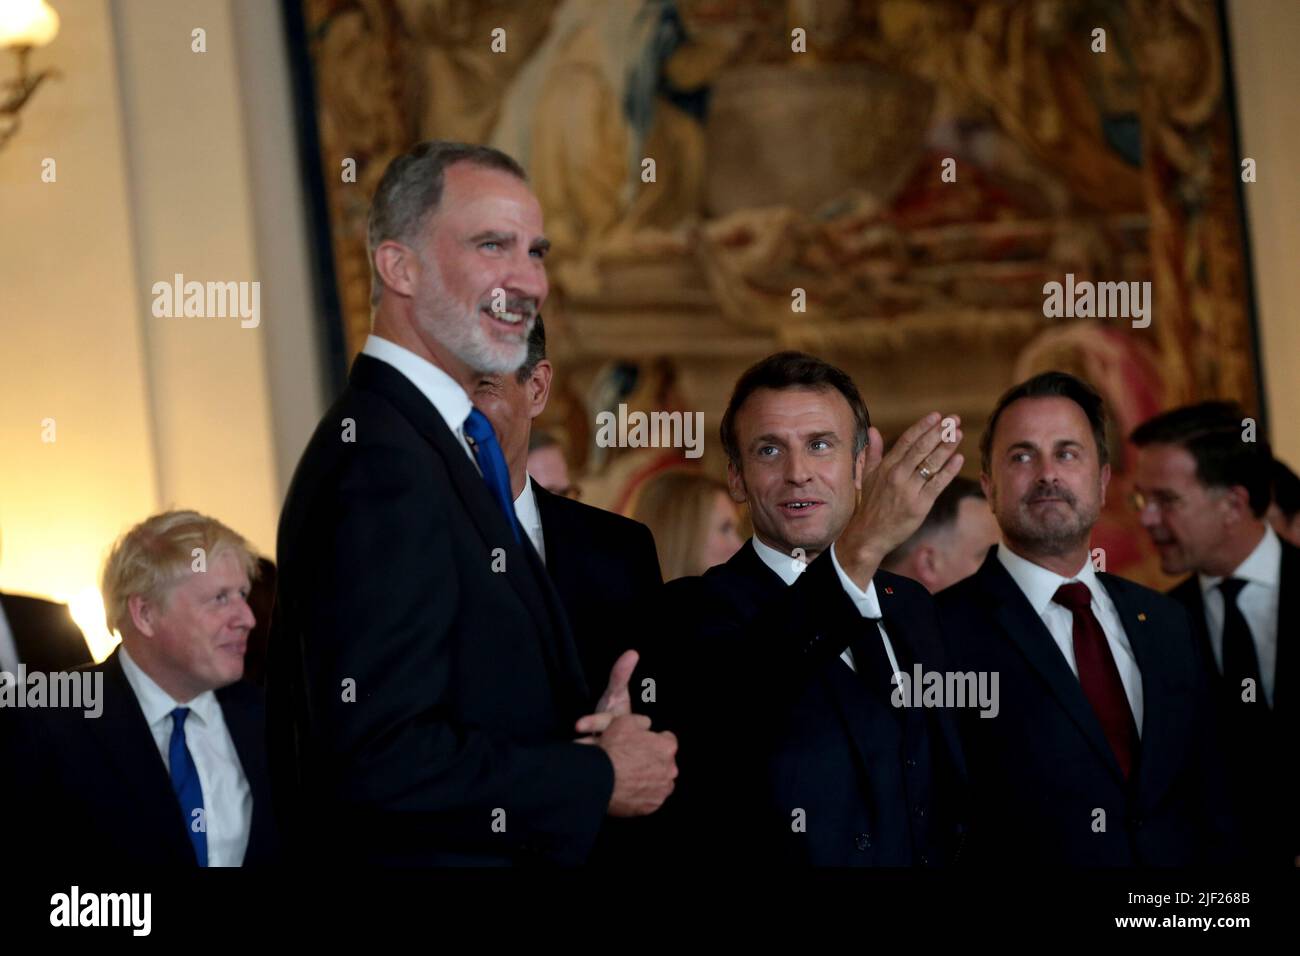 Madrid, Spain; 28.06.2022.- Kings of Spain Felipe VI and Letizia share a photo and table with Joe Bilden, Pedro Sanchez, Emmanuel Macron, Boris Jhonson, and the other leaders of the West, they meet at the royal palace of Spain for dinner before the NATO Summit in Madrid Photo: Juan Carlos Rojas Stock Photo